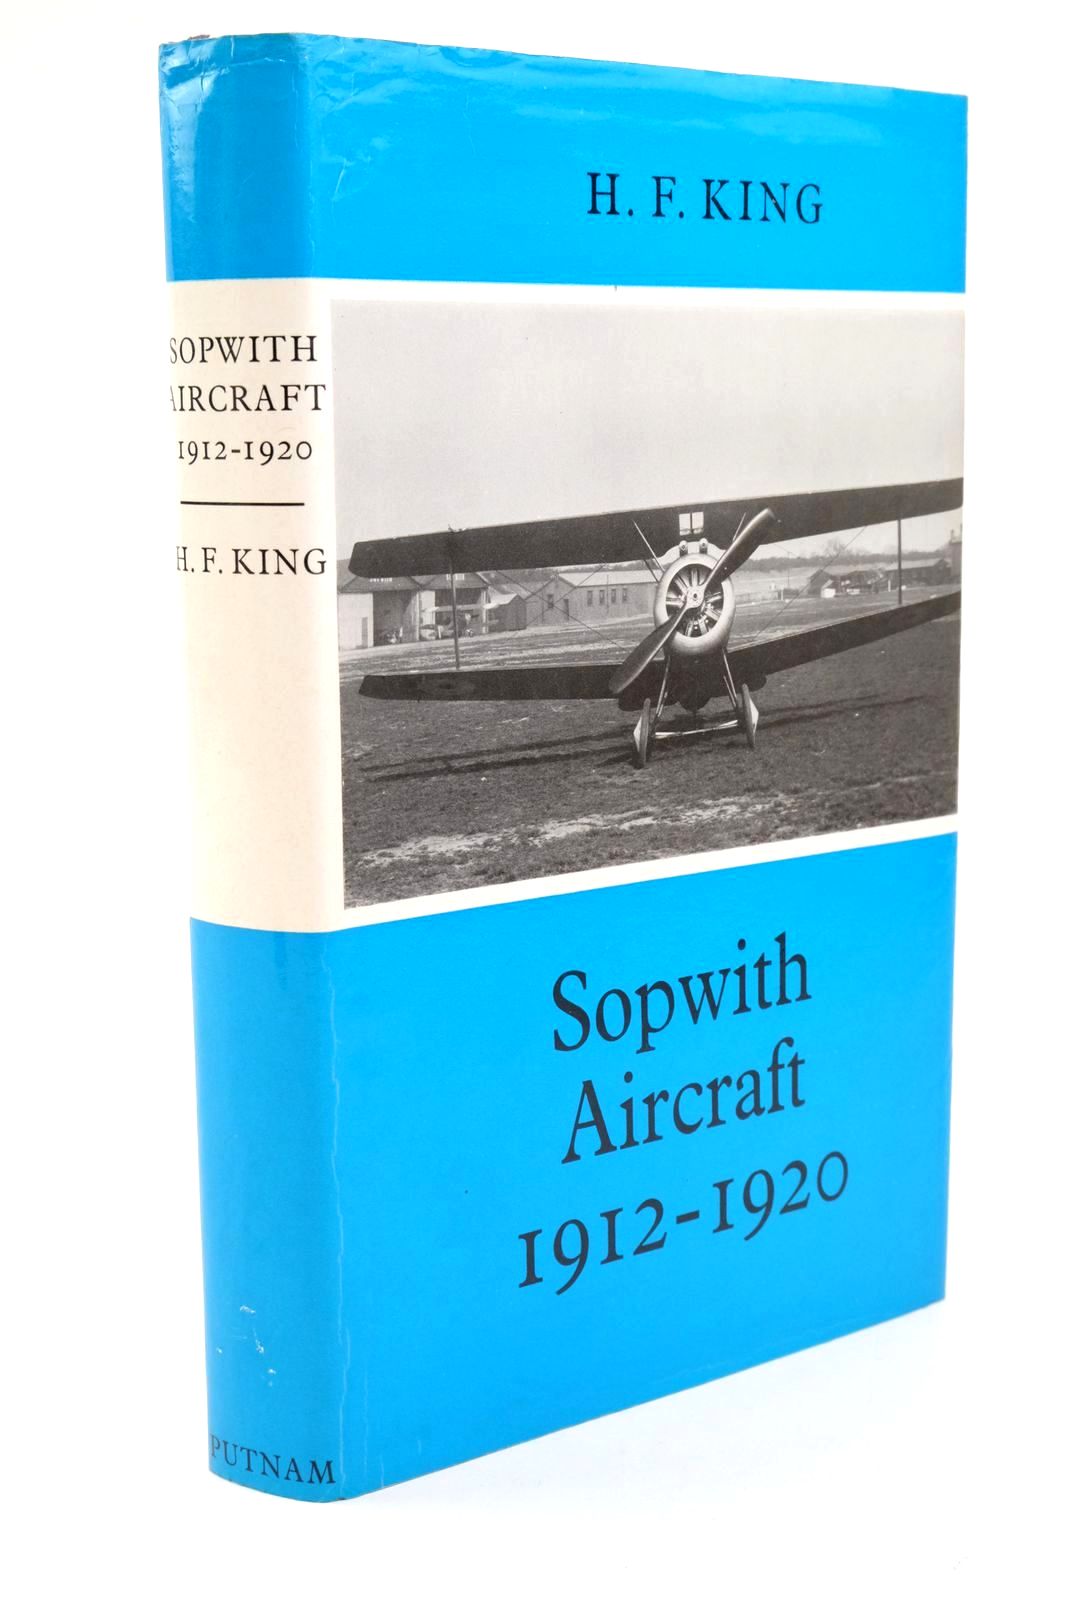 Photo of SOPWITH AIRCRAFT 1912-1920 written by King, H.F. published by Putnam (STOCK CODE: 1322006)  for sale by Stella & Rose's Books